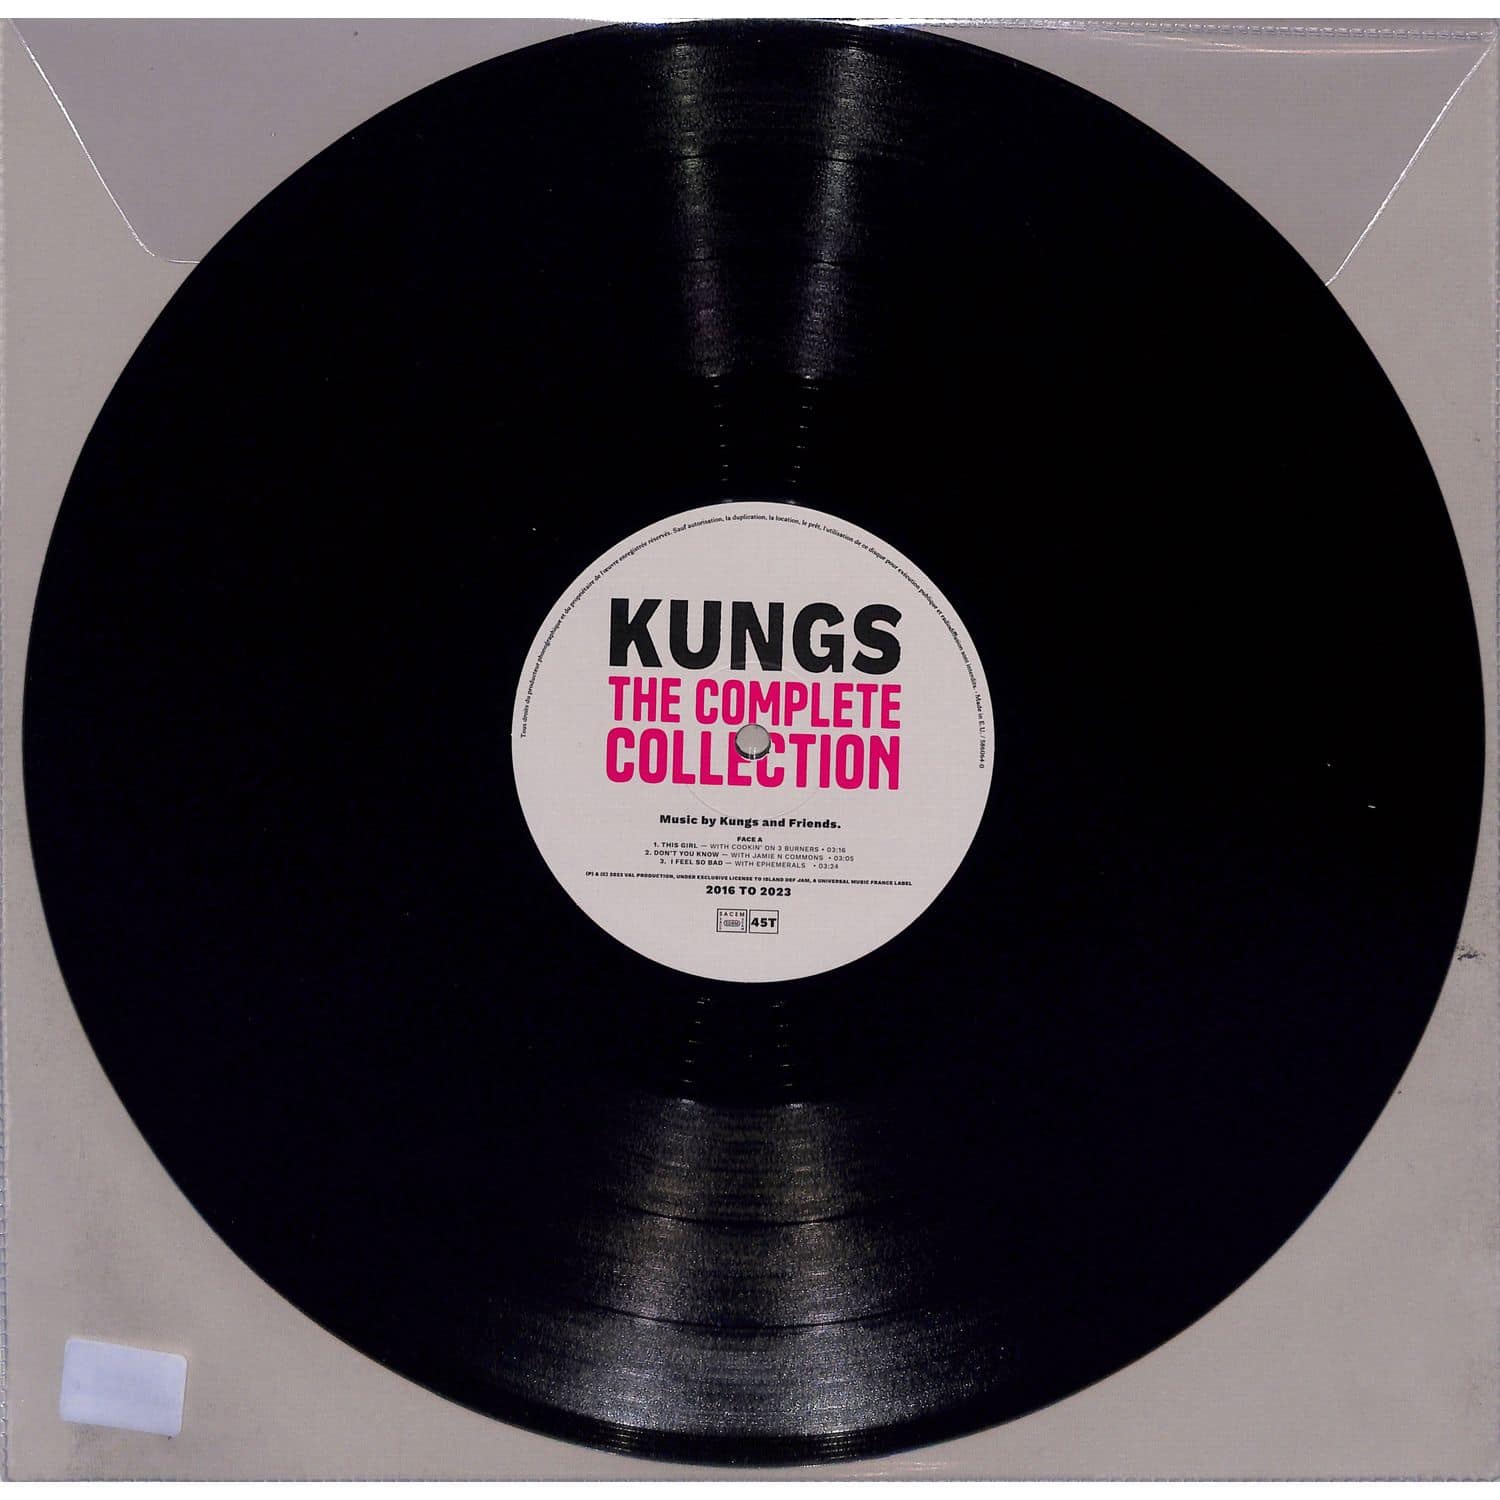 Kungs - THE COMPLETE COLLECTION 